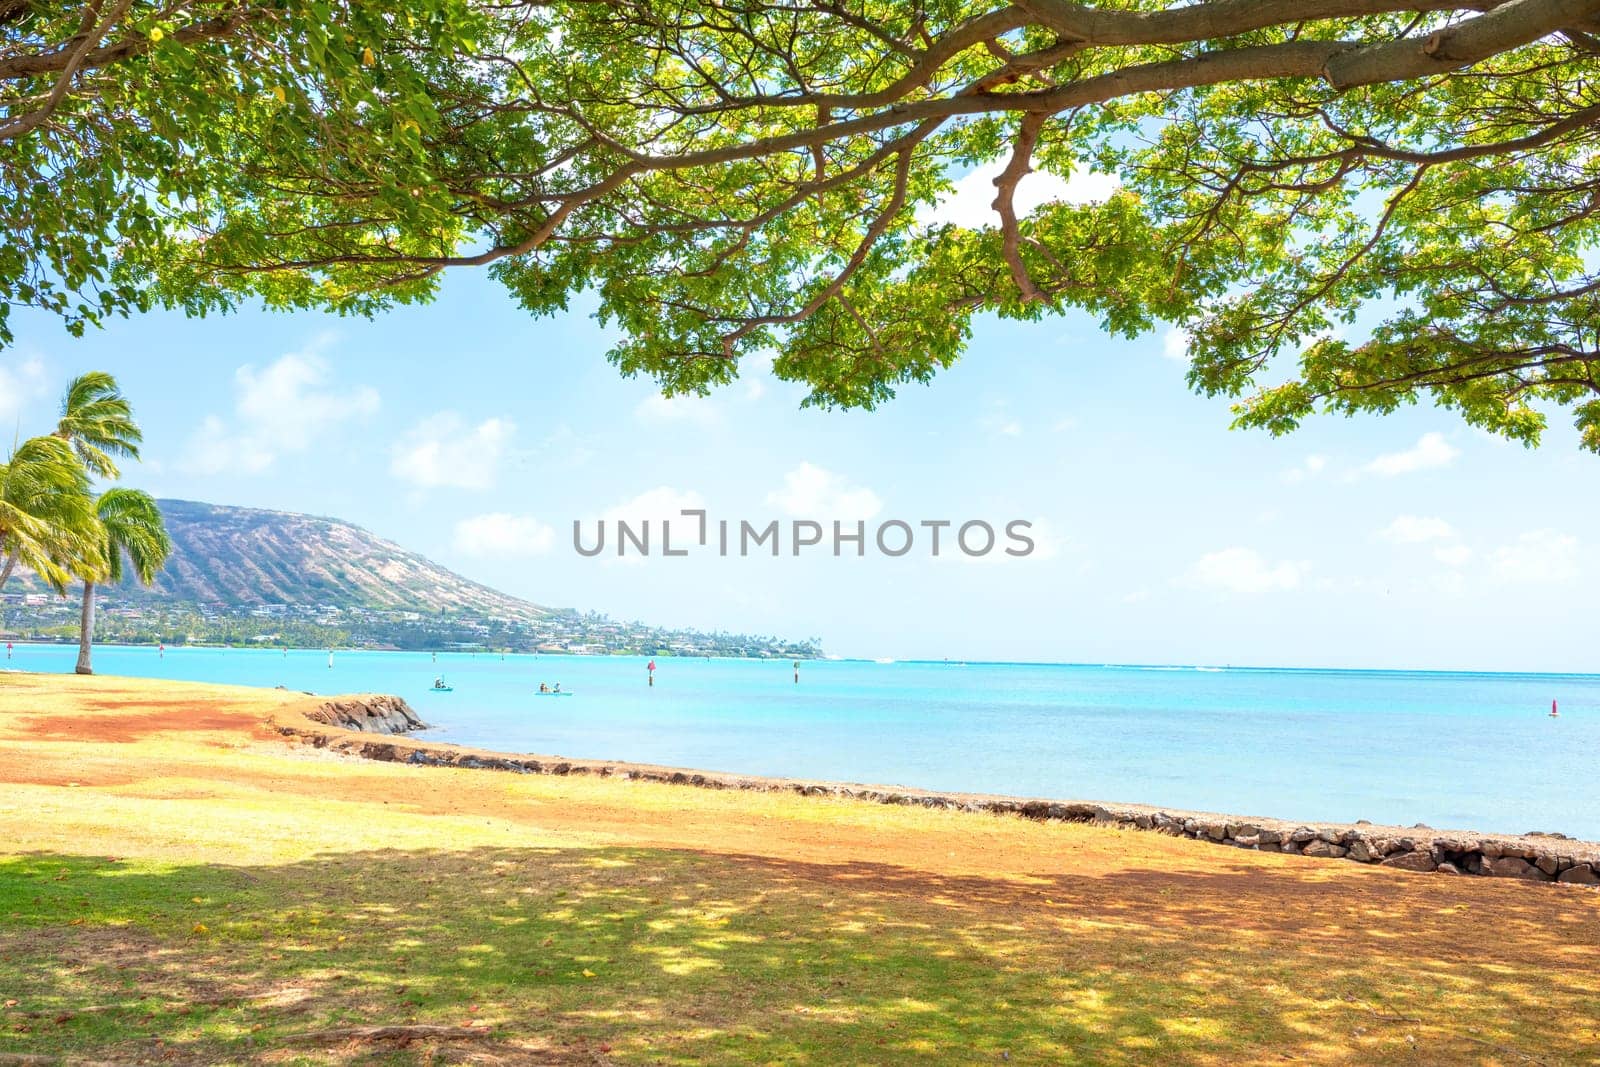 View of Kokohead Crater, Oahu, and ocean horizon from under large shade tree